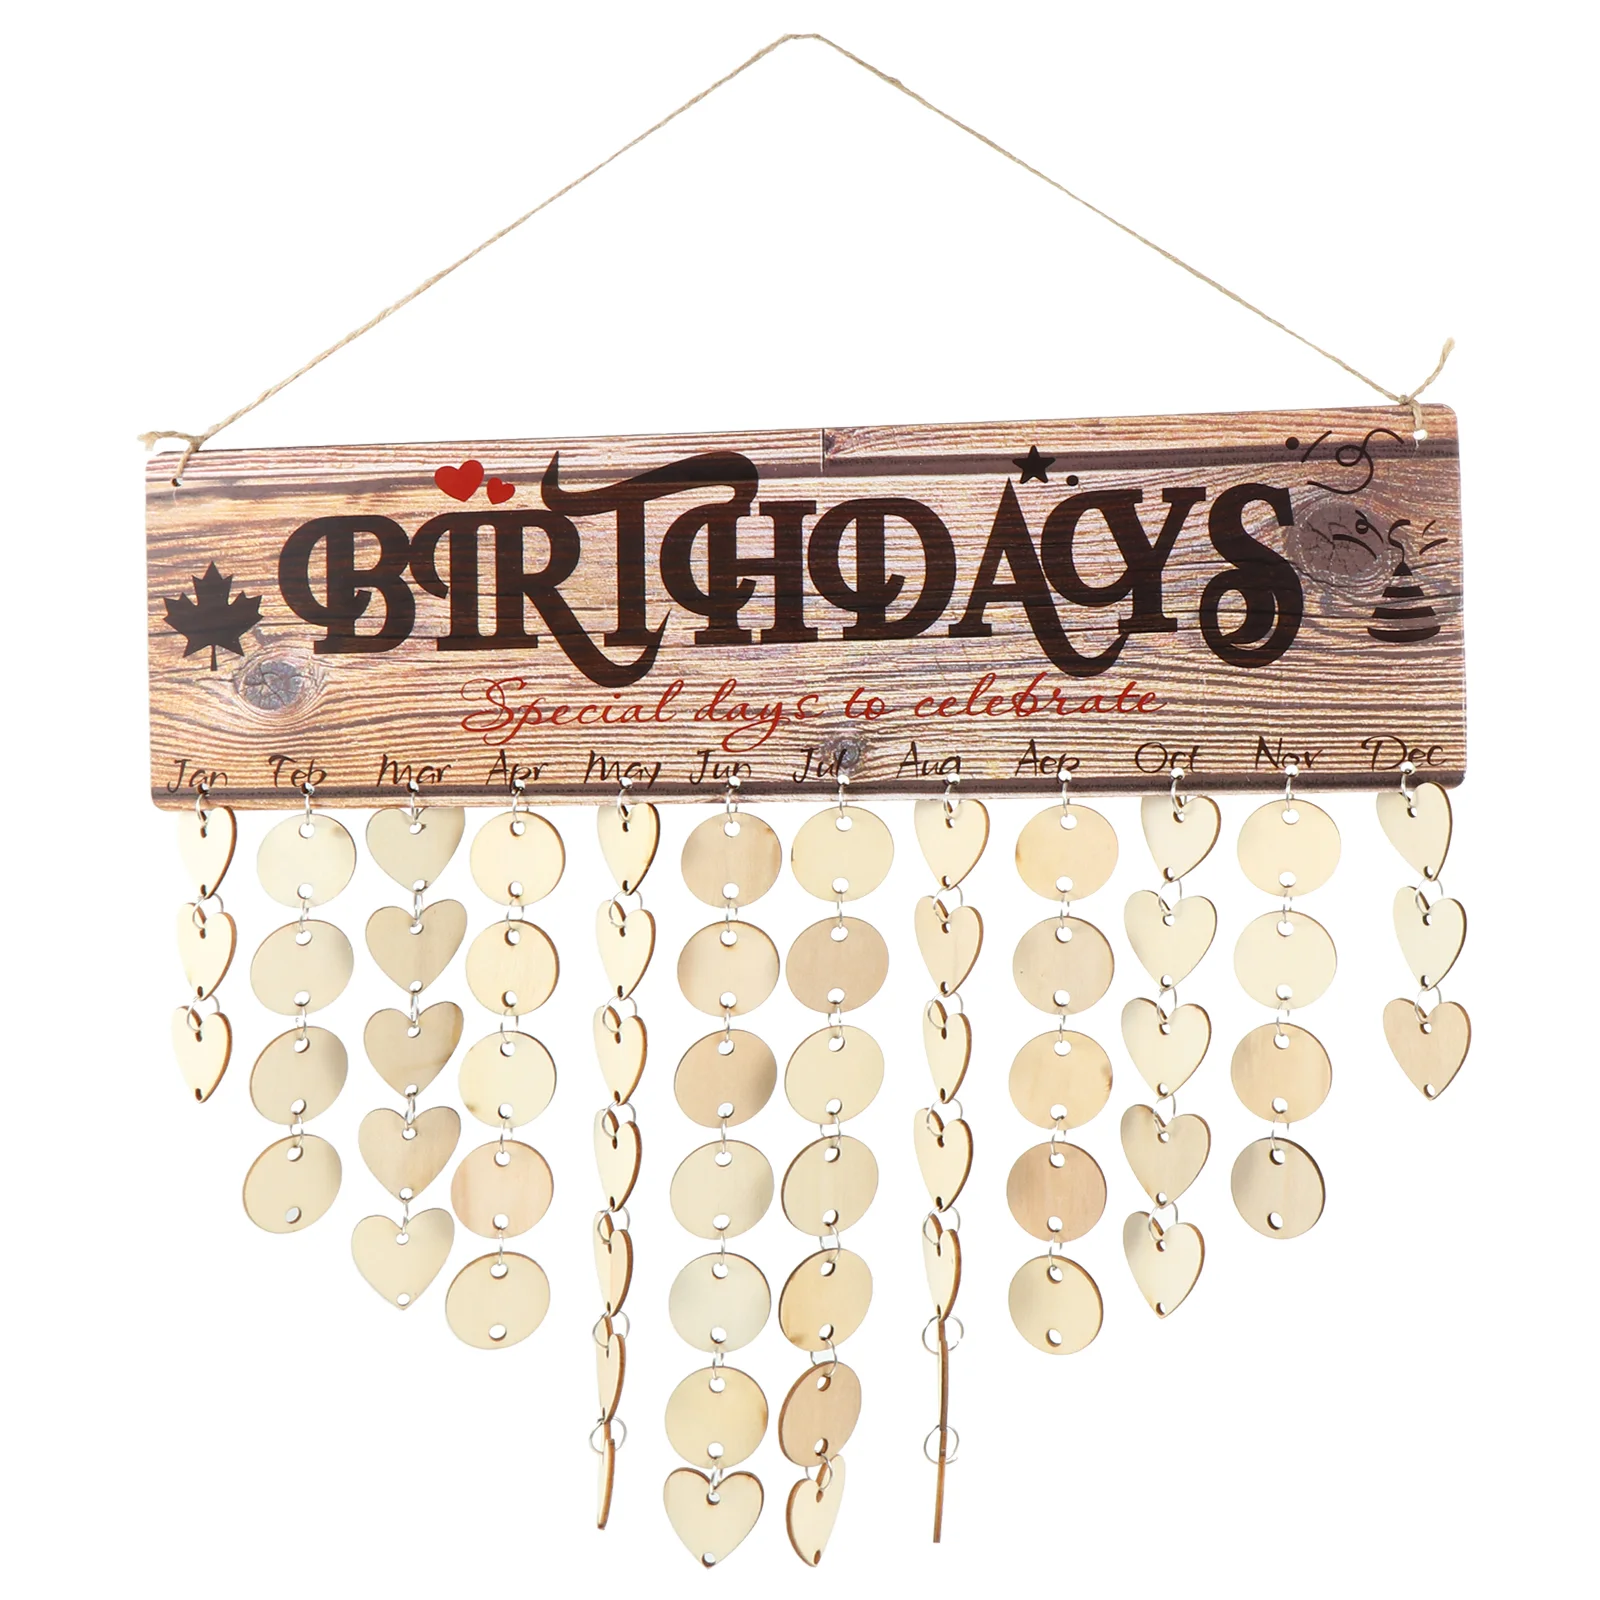 

Large Family Birthday Reminder Wooden Board Calendar 40x12cm Wall Hanging DIY Signs Plaque with Wood Heart Circle Tags